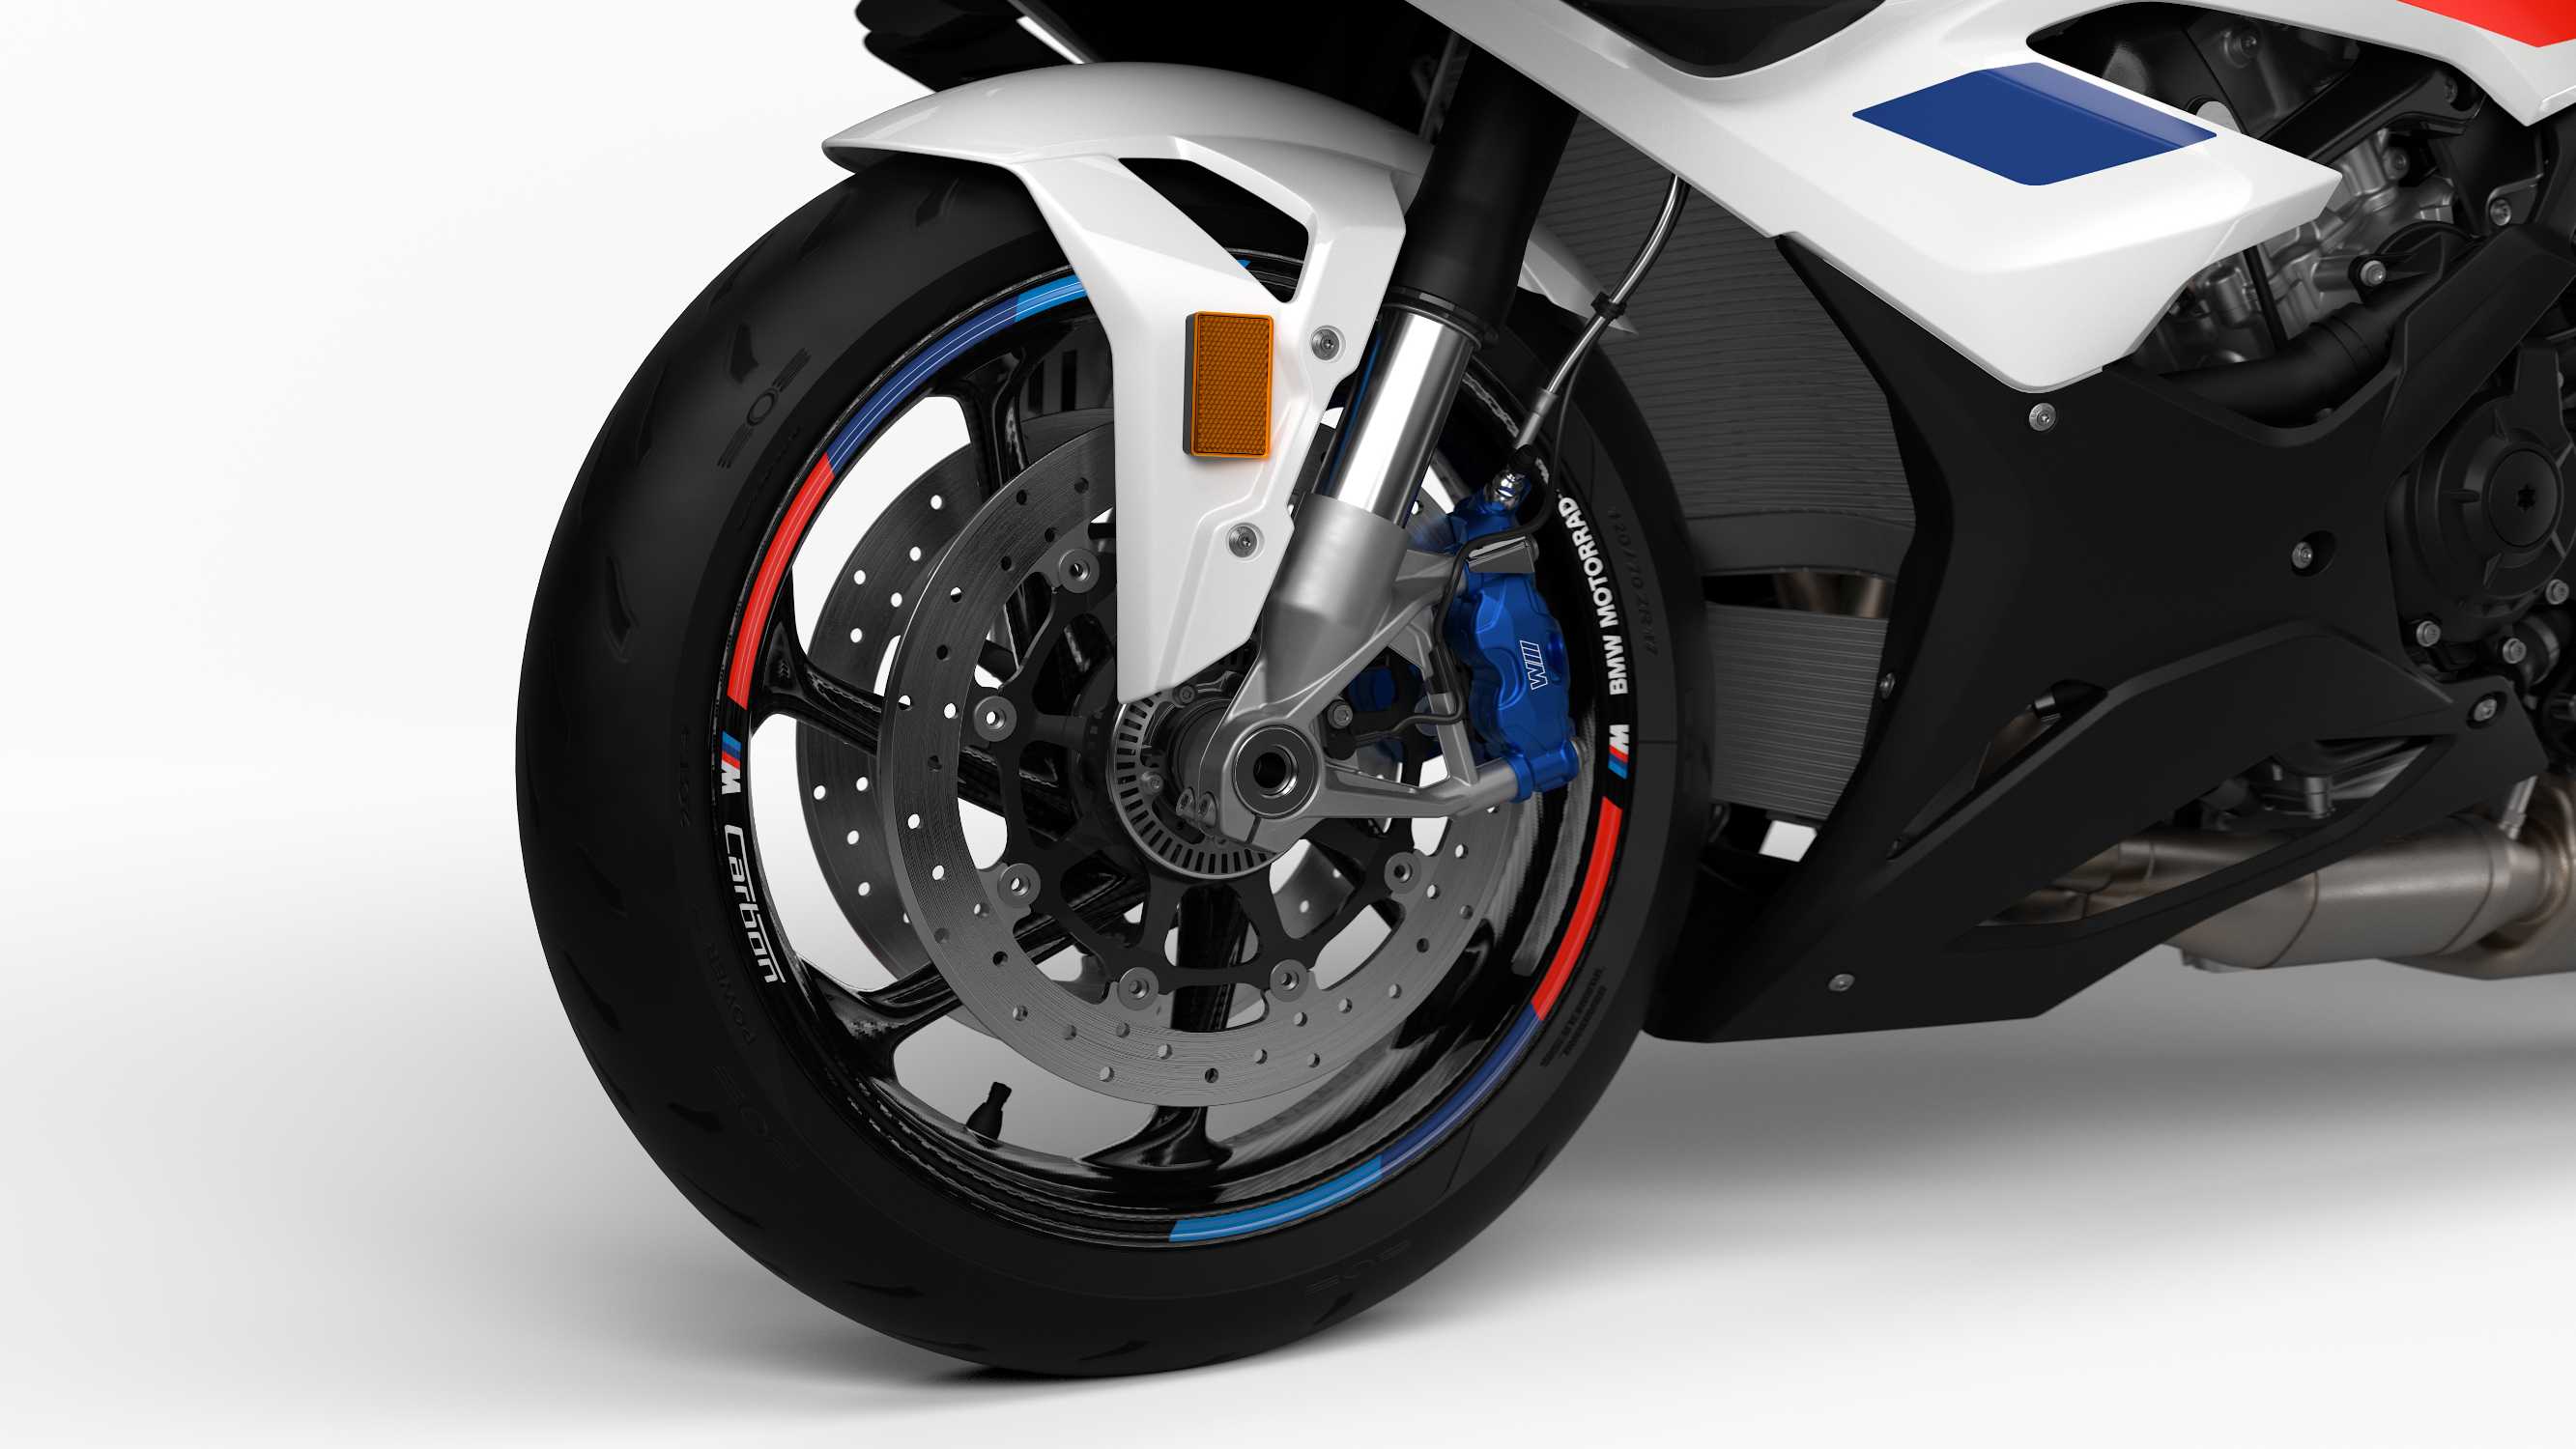 The new BMW S 1000 RR (09/2022)